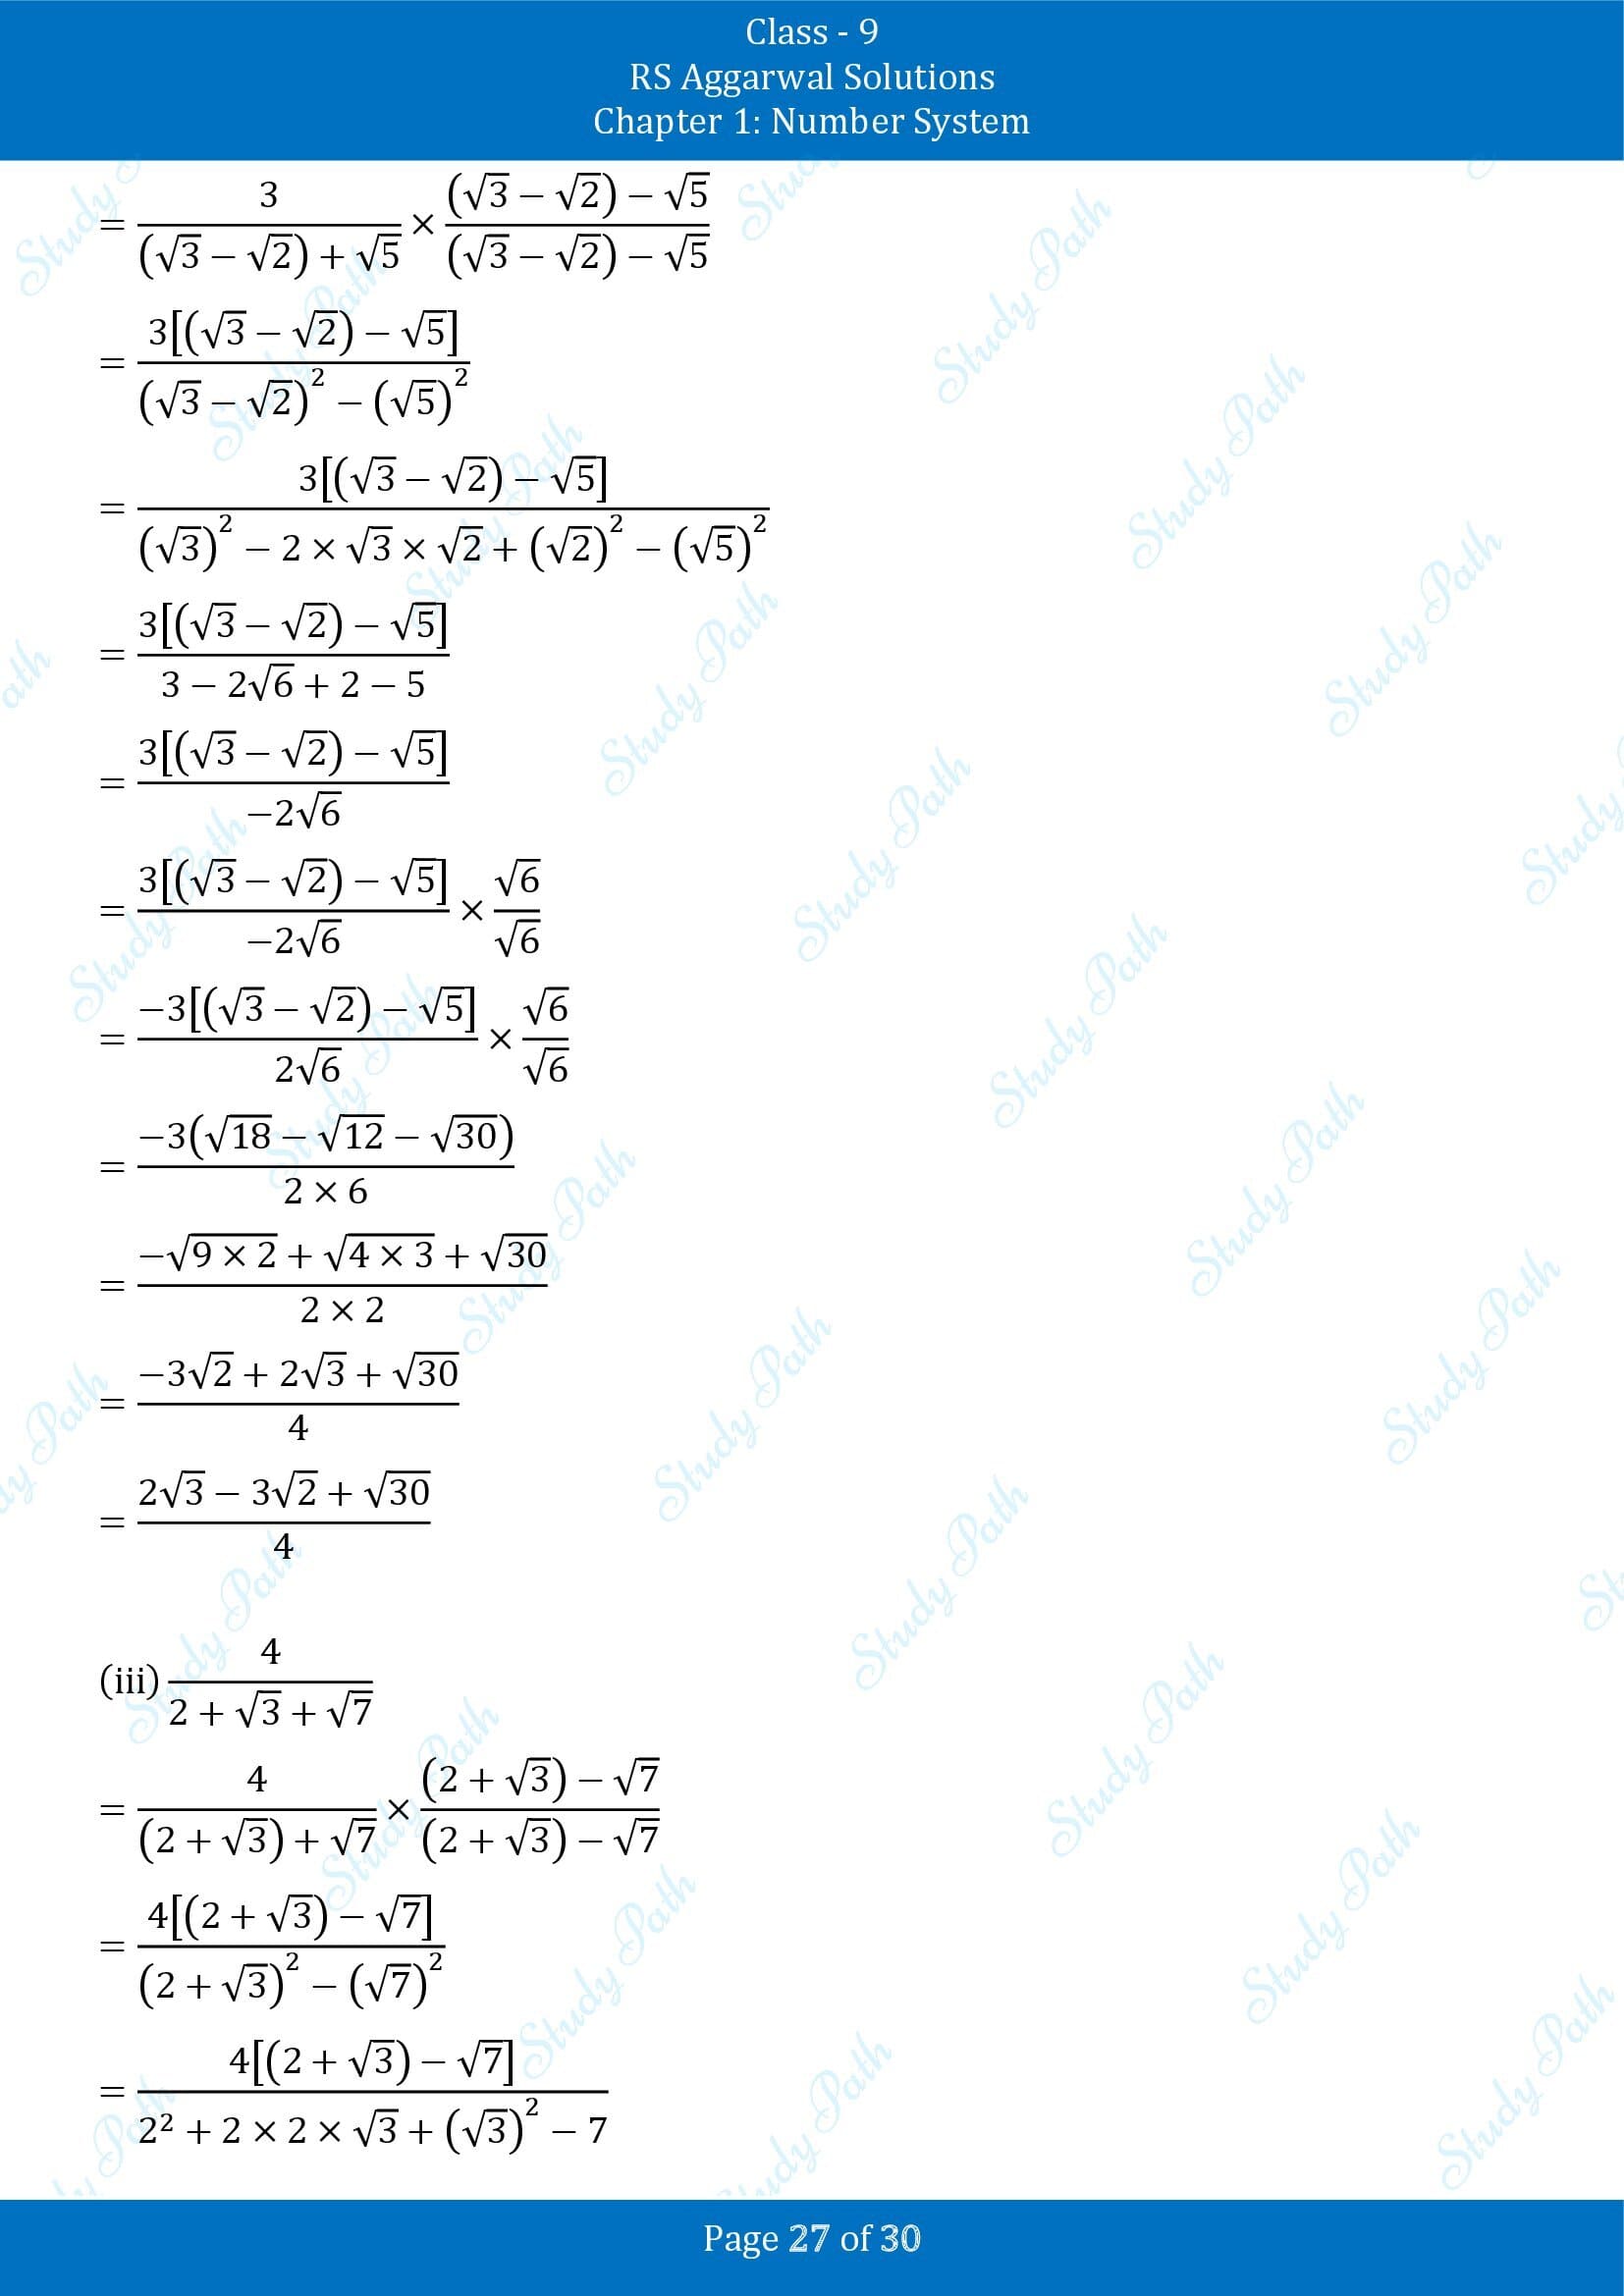 RS Aggarwal Solutions Class 9 Chapter 1 Number System Exercise 1F 00027